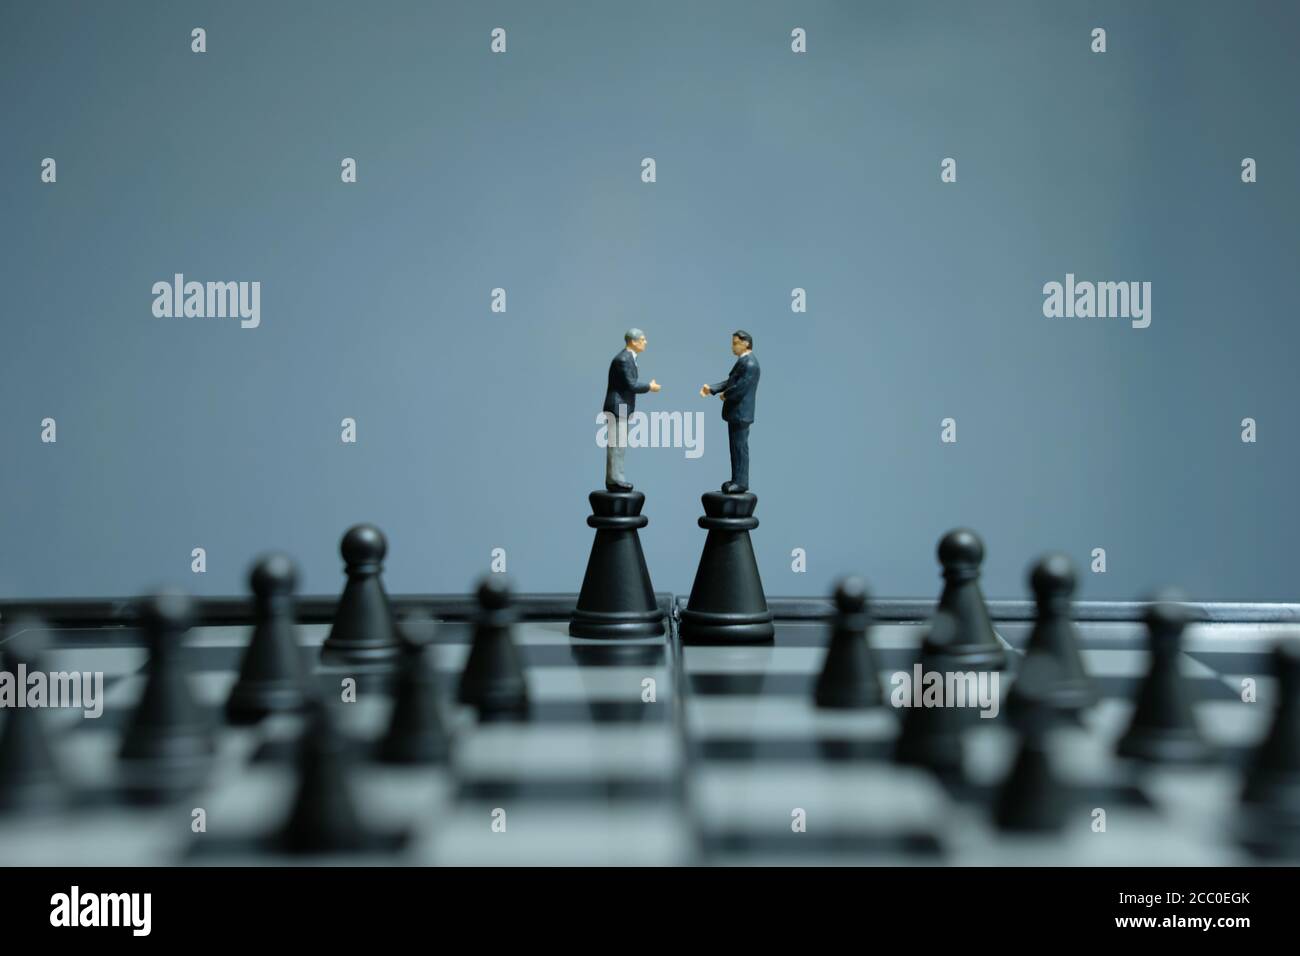 Image of chess game. Businessman looking at compass and pawns